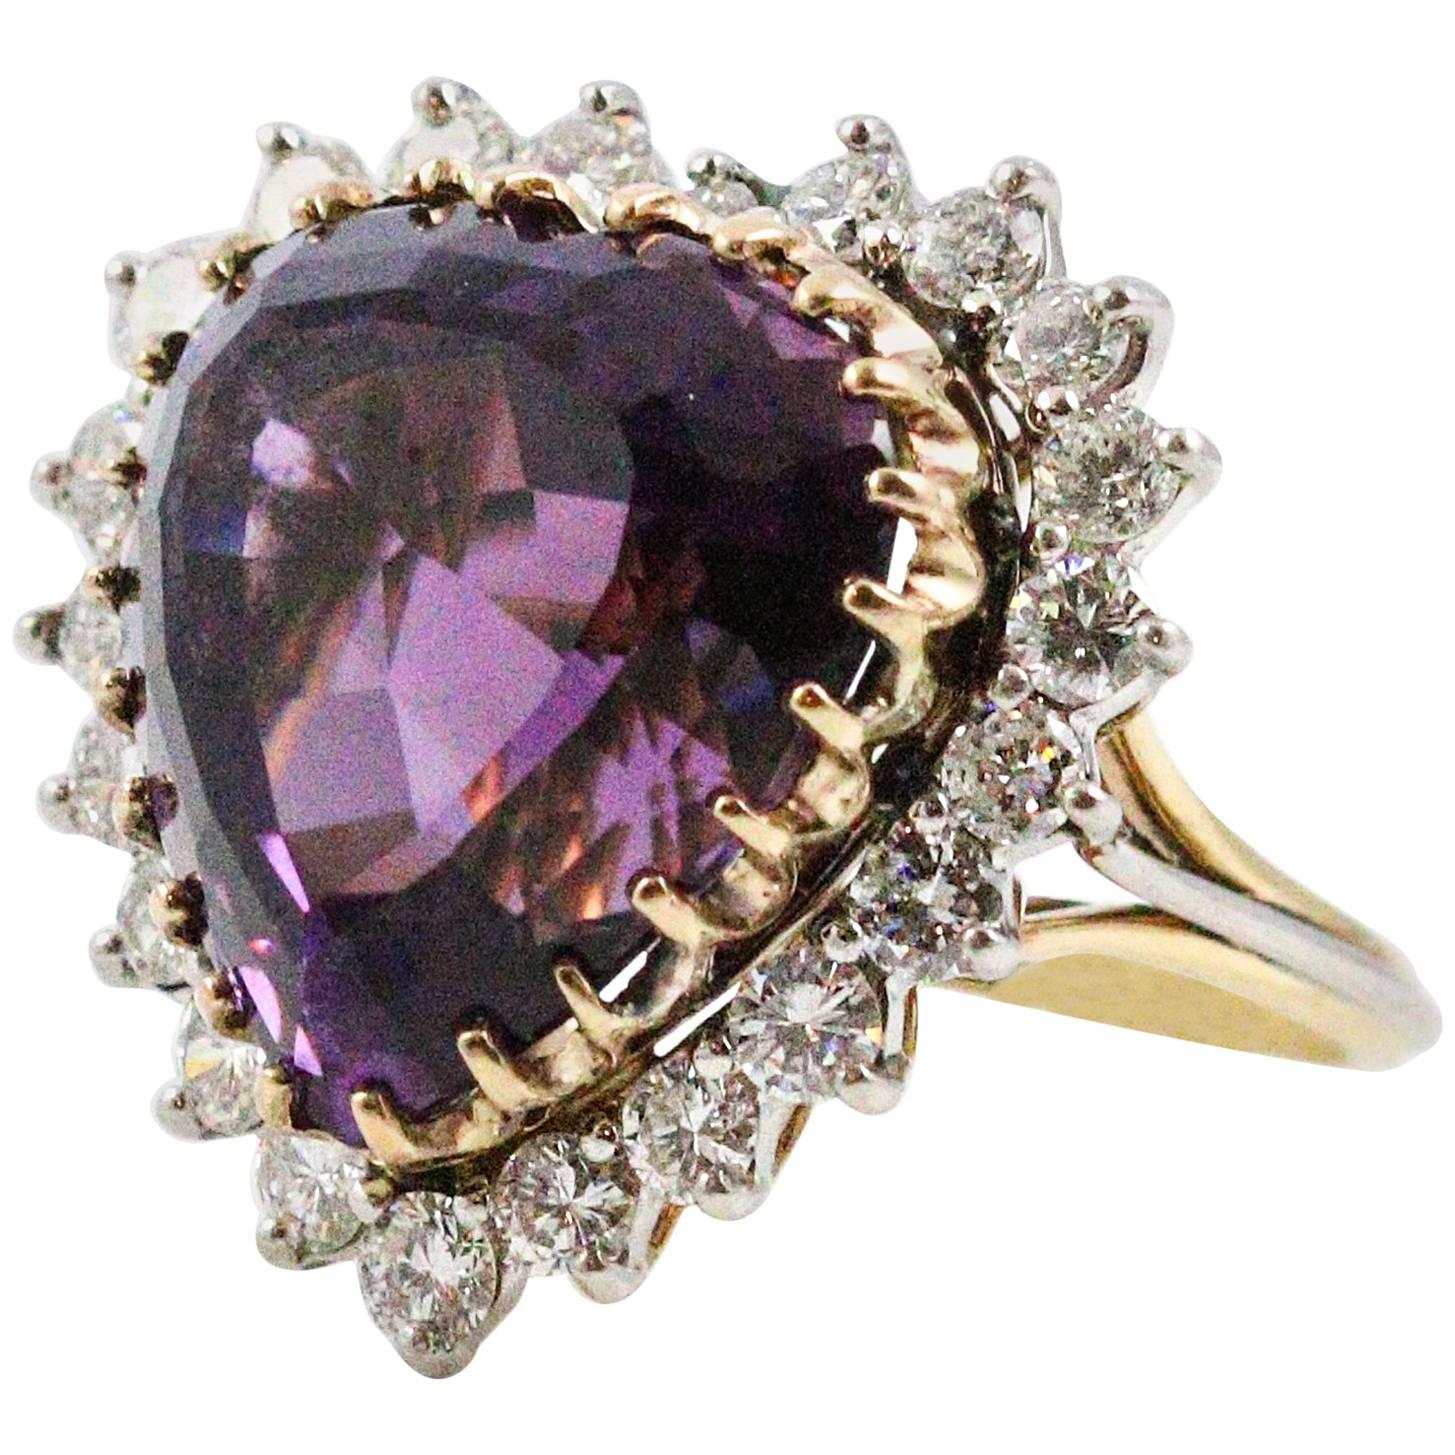 1950s Retro 12 Carat Approximate Heart Shaped Amethyst and Diamond Ring